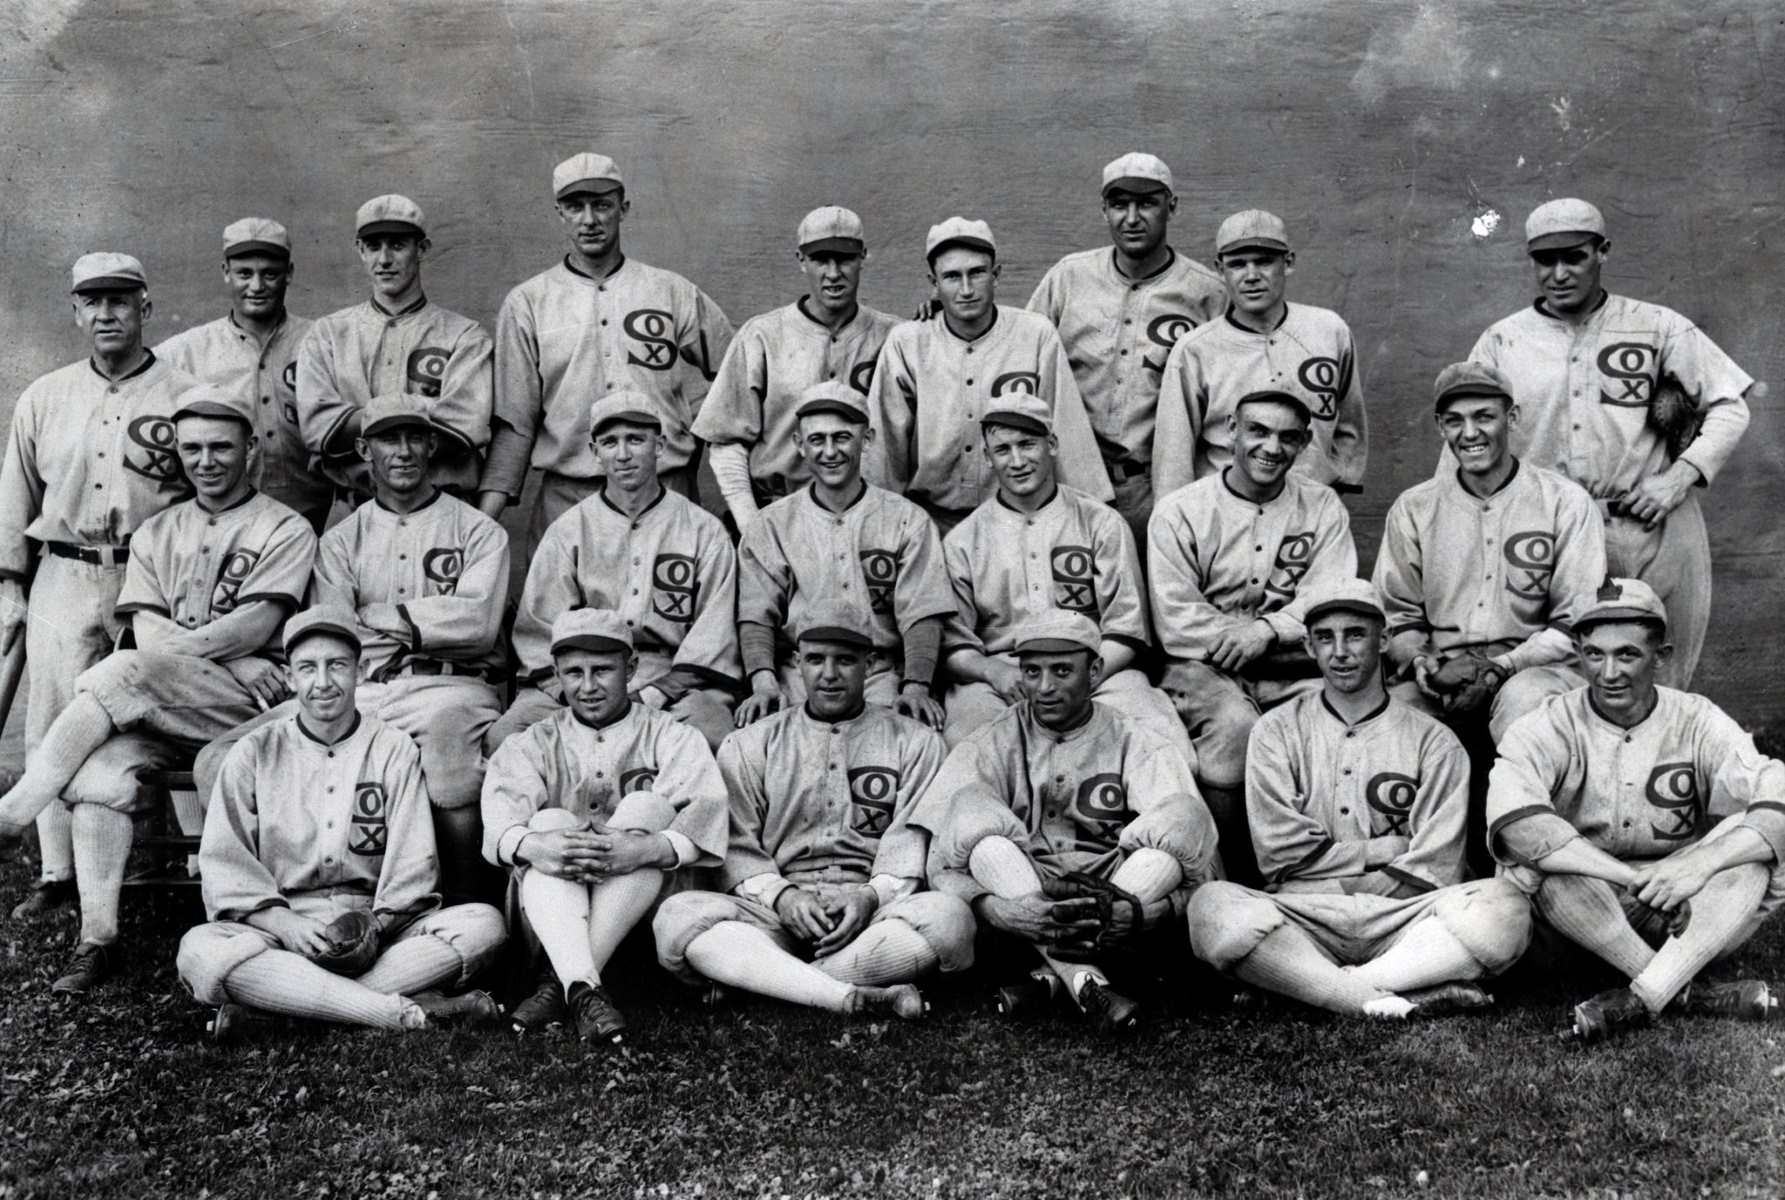 The Shocking Truth Behind The Chicago White Sox’s Devastating Loss In The 1919 World Series